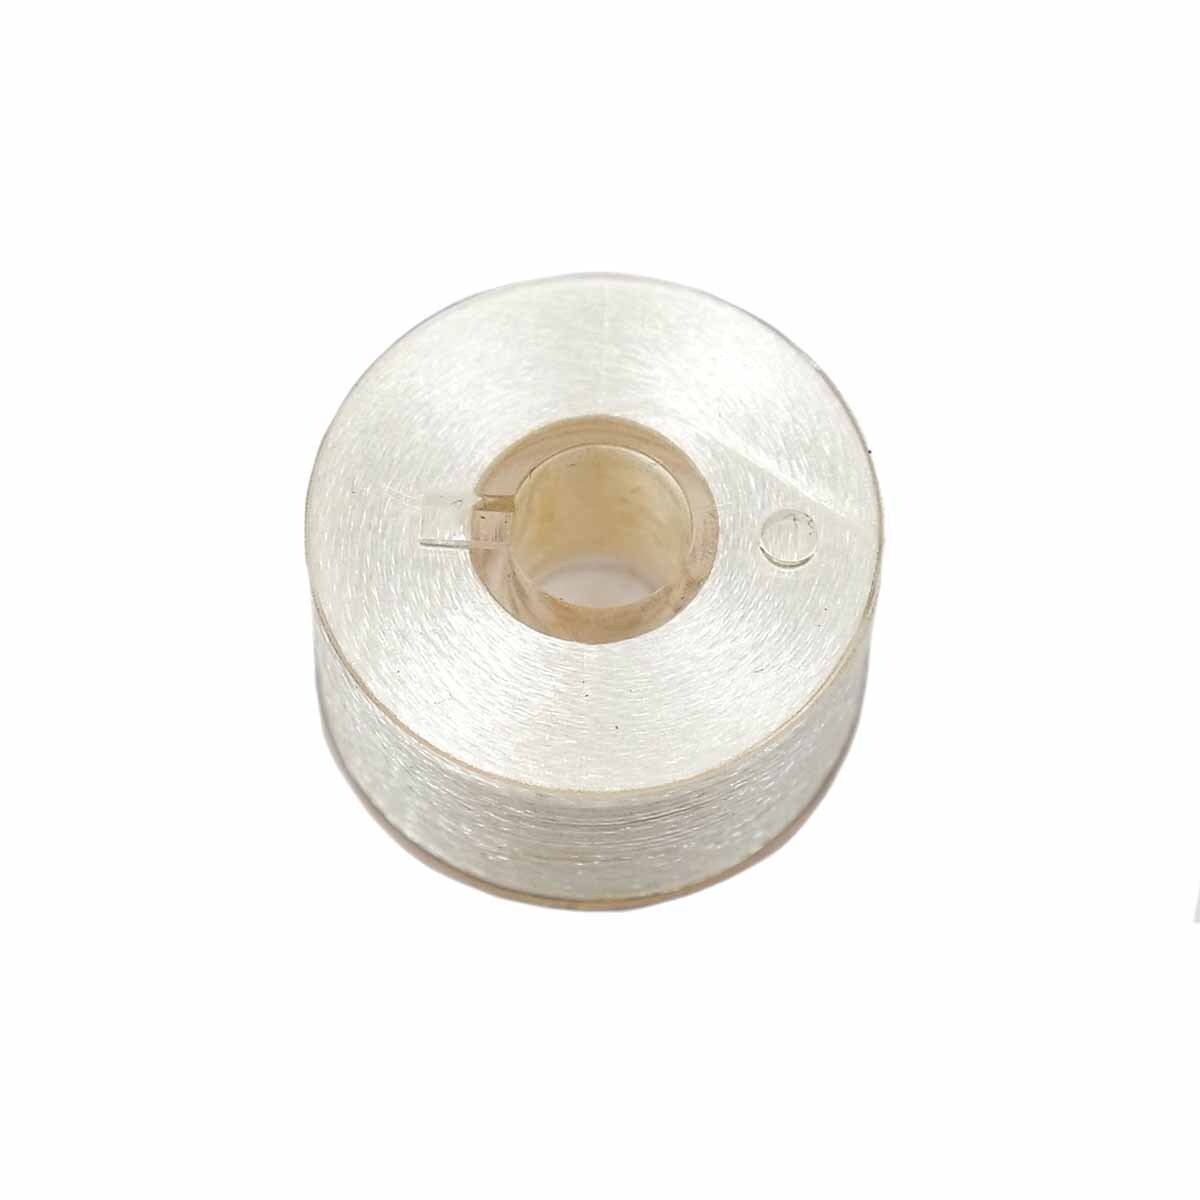 CleverDelights White Prewound Bobbins - Size L Bobbins - 60wt Thread -  Plastic Sided - 144 Pack 